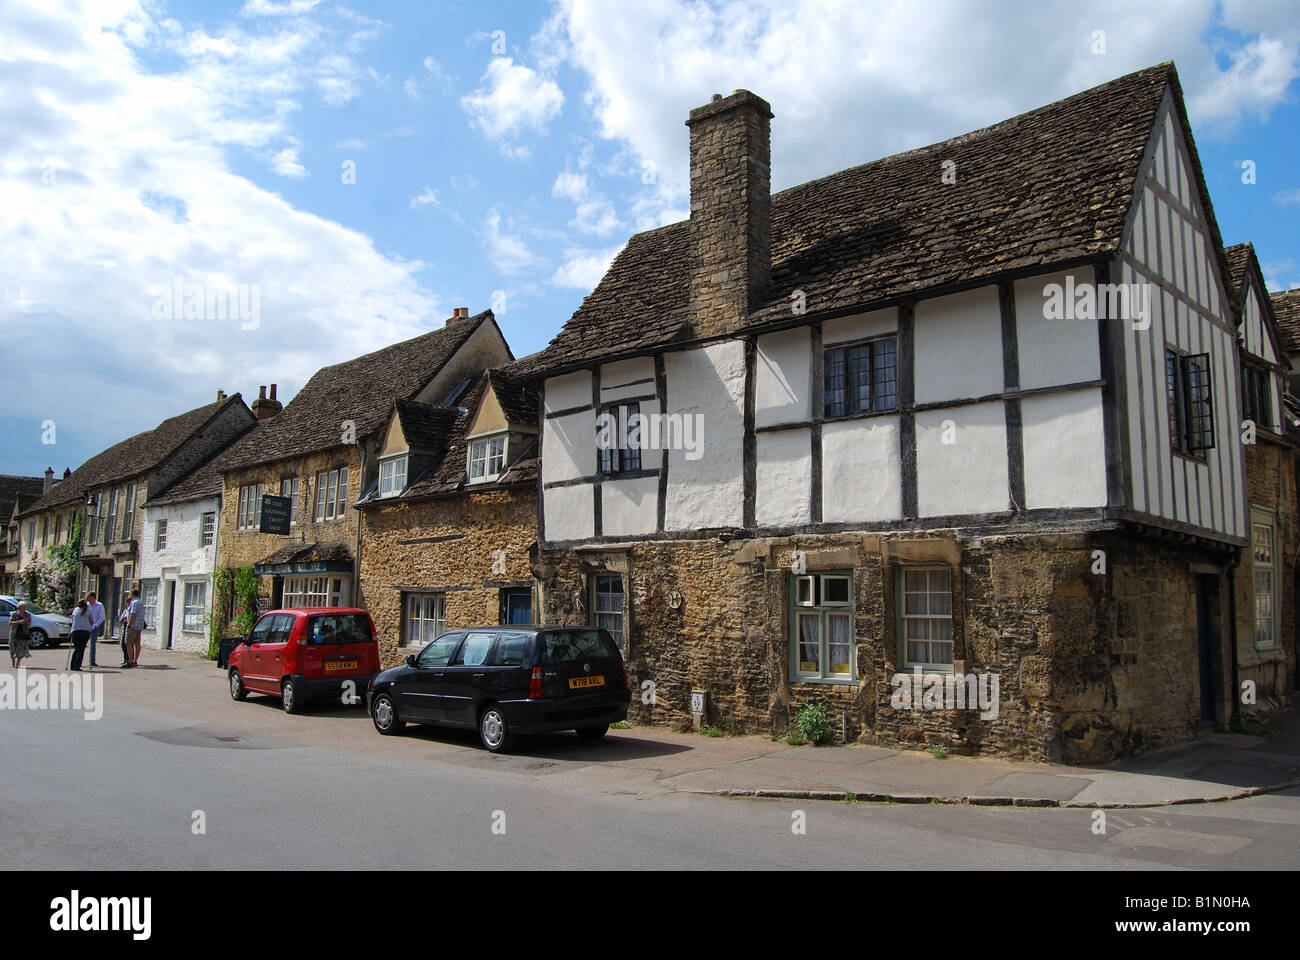 View of village, High Street, Lacock, Wiltshire, England, United Kingdom Stock Photo